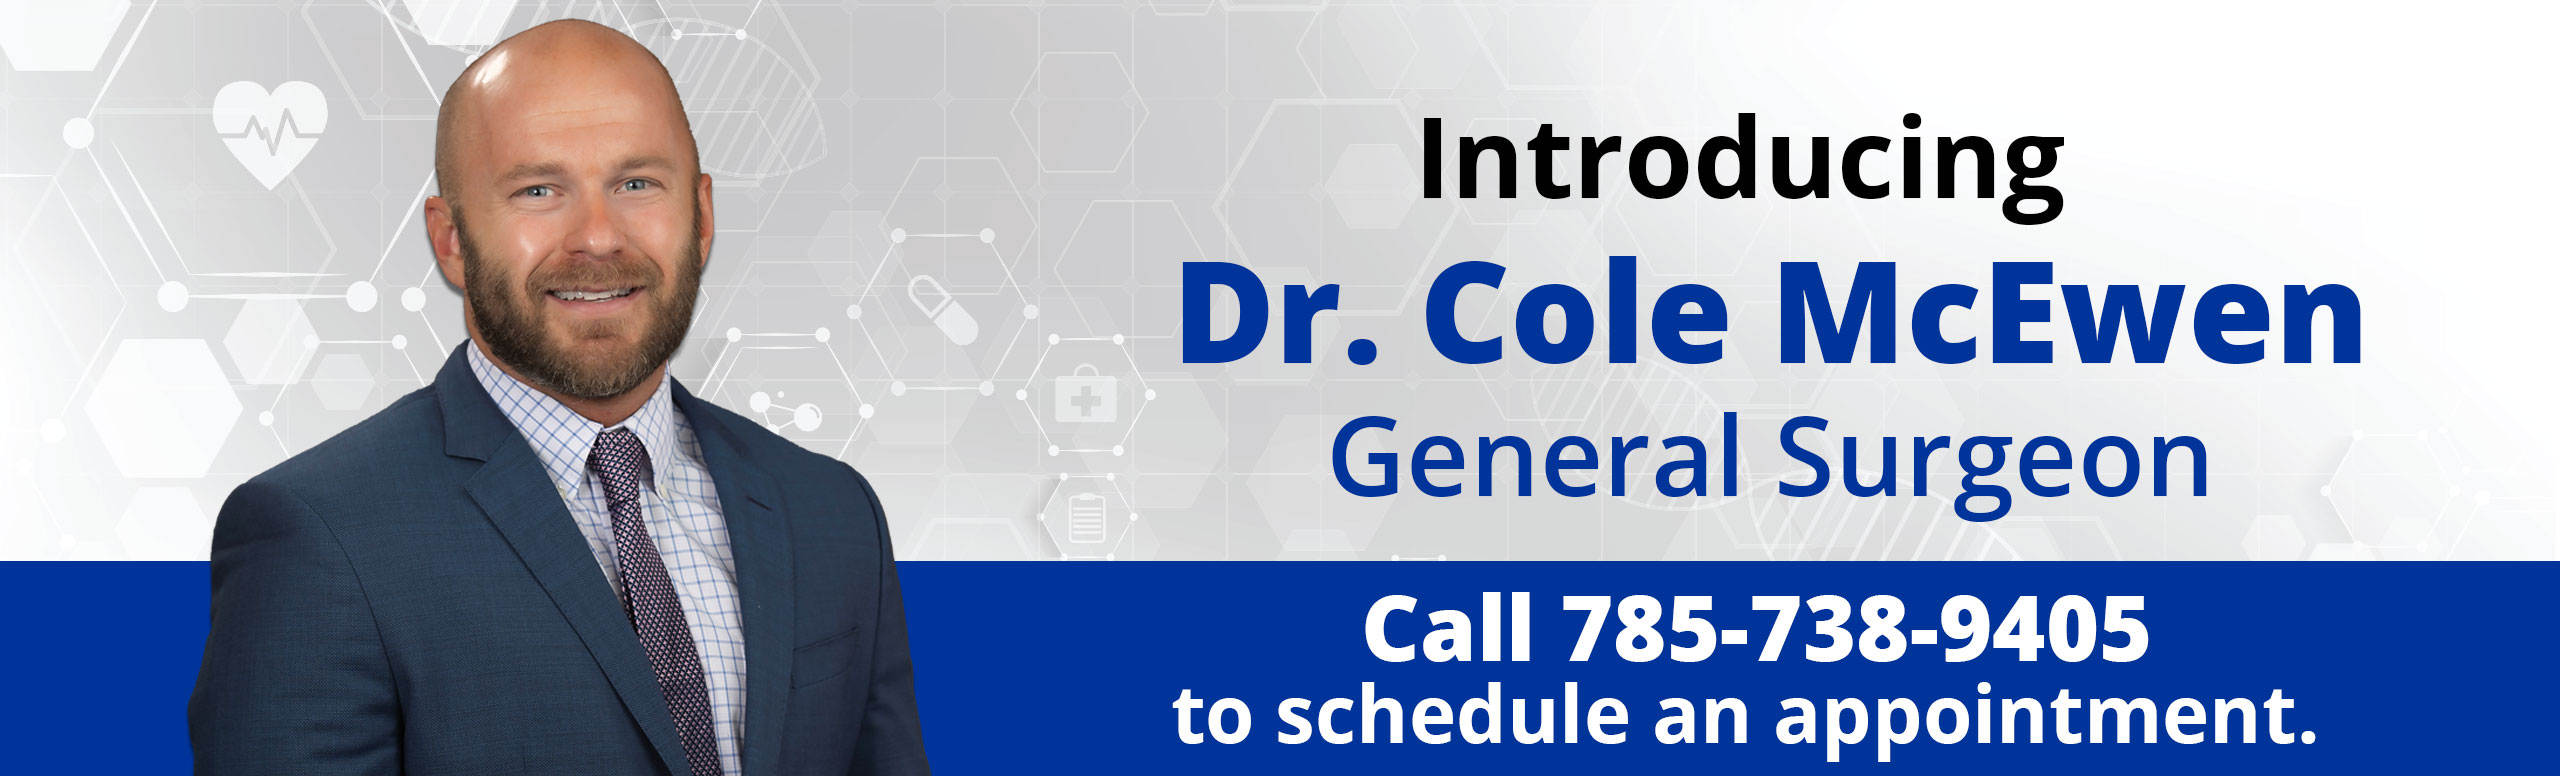 Introducing Dr. Cole McEwen
General Surgeon 
all 785-738-9405 to schedule an appointment.